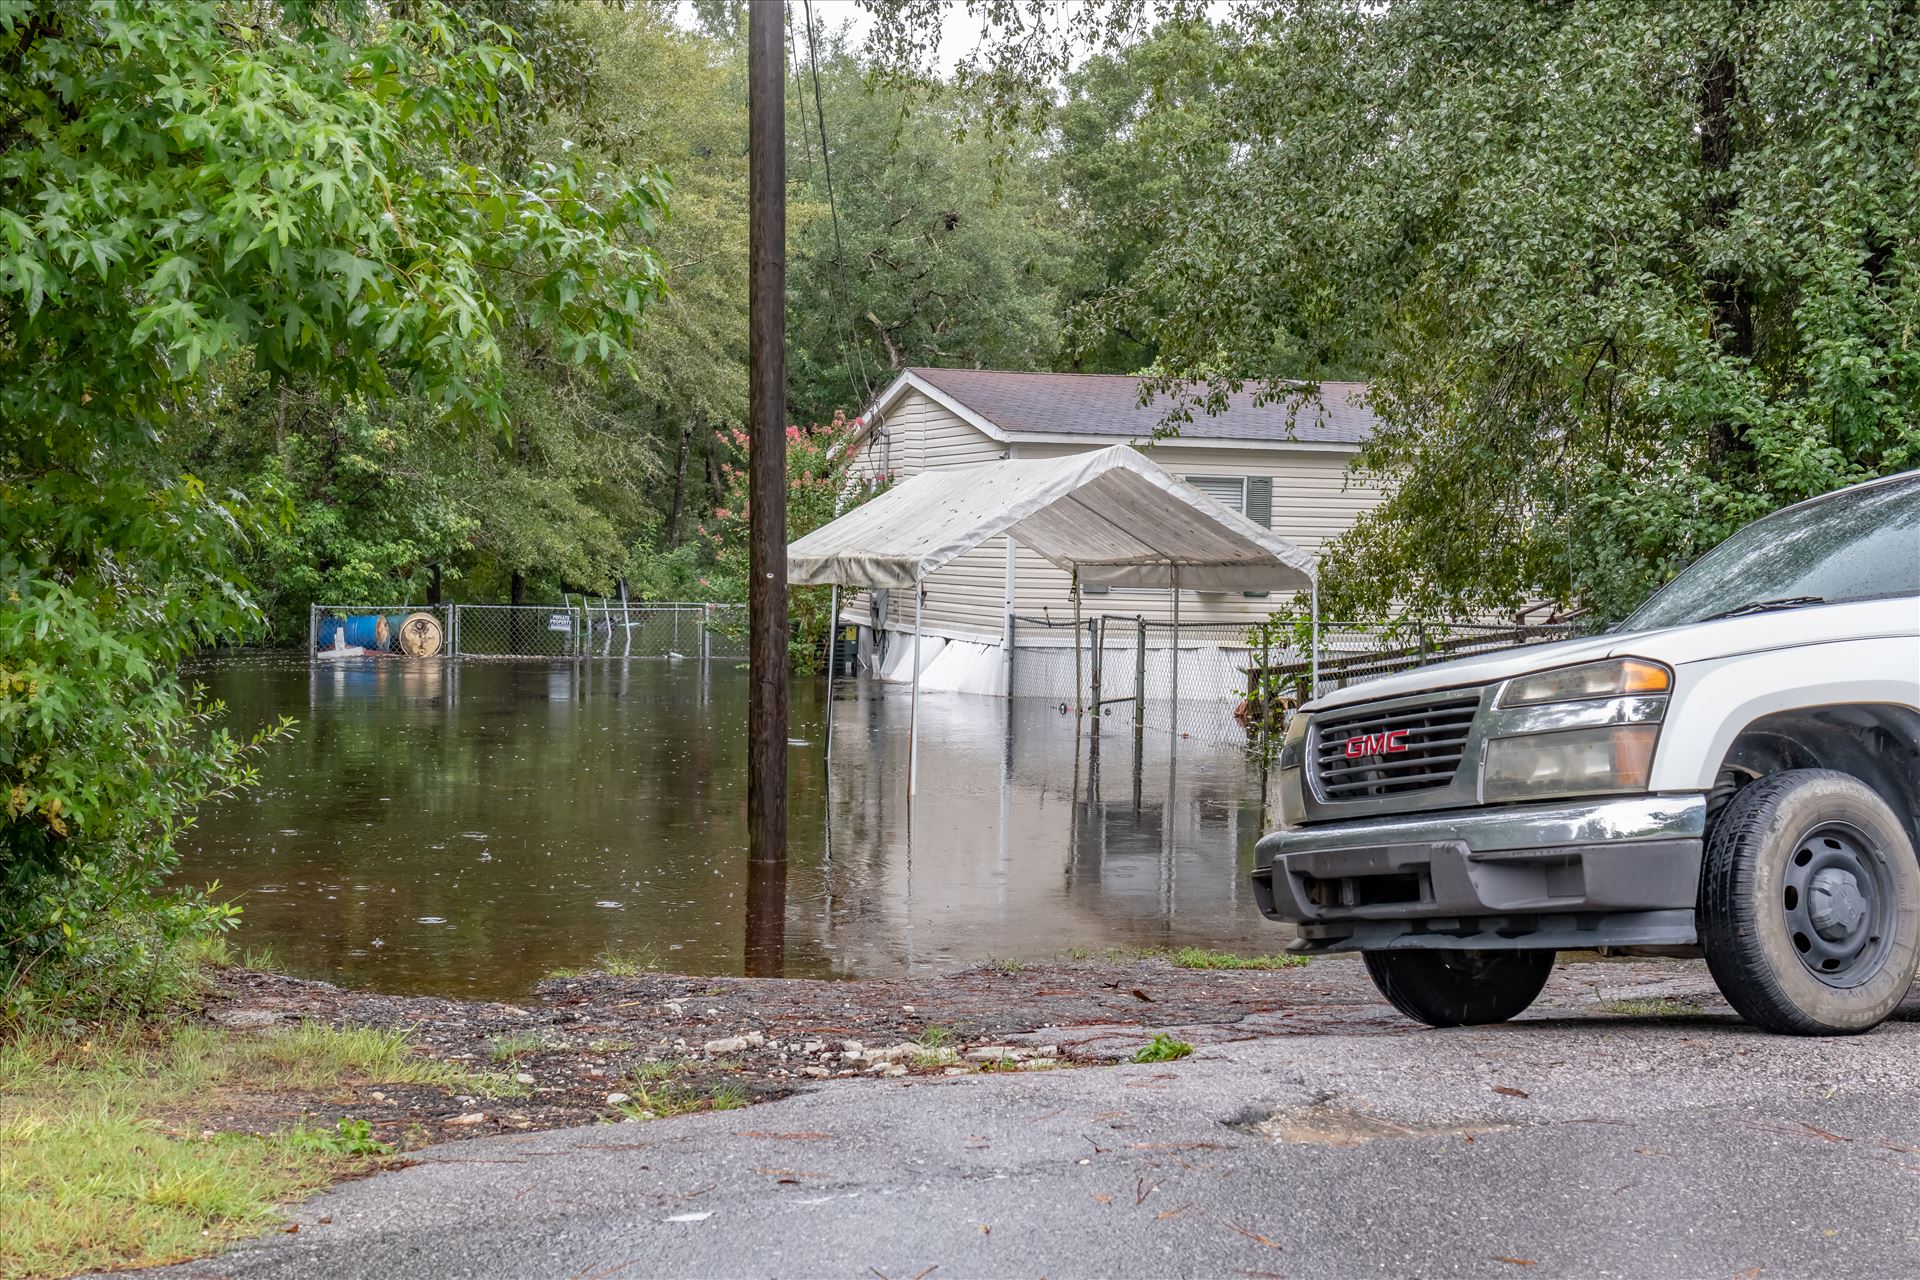 bear creek out of bank 6 August 02, 2018.jpg - August 02, 2018 heavy rains flooded many parts of Bay County, Florida. This photo is in the Bear Creek area. by Terry Kelly Photography